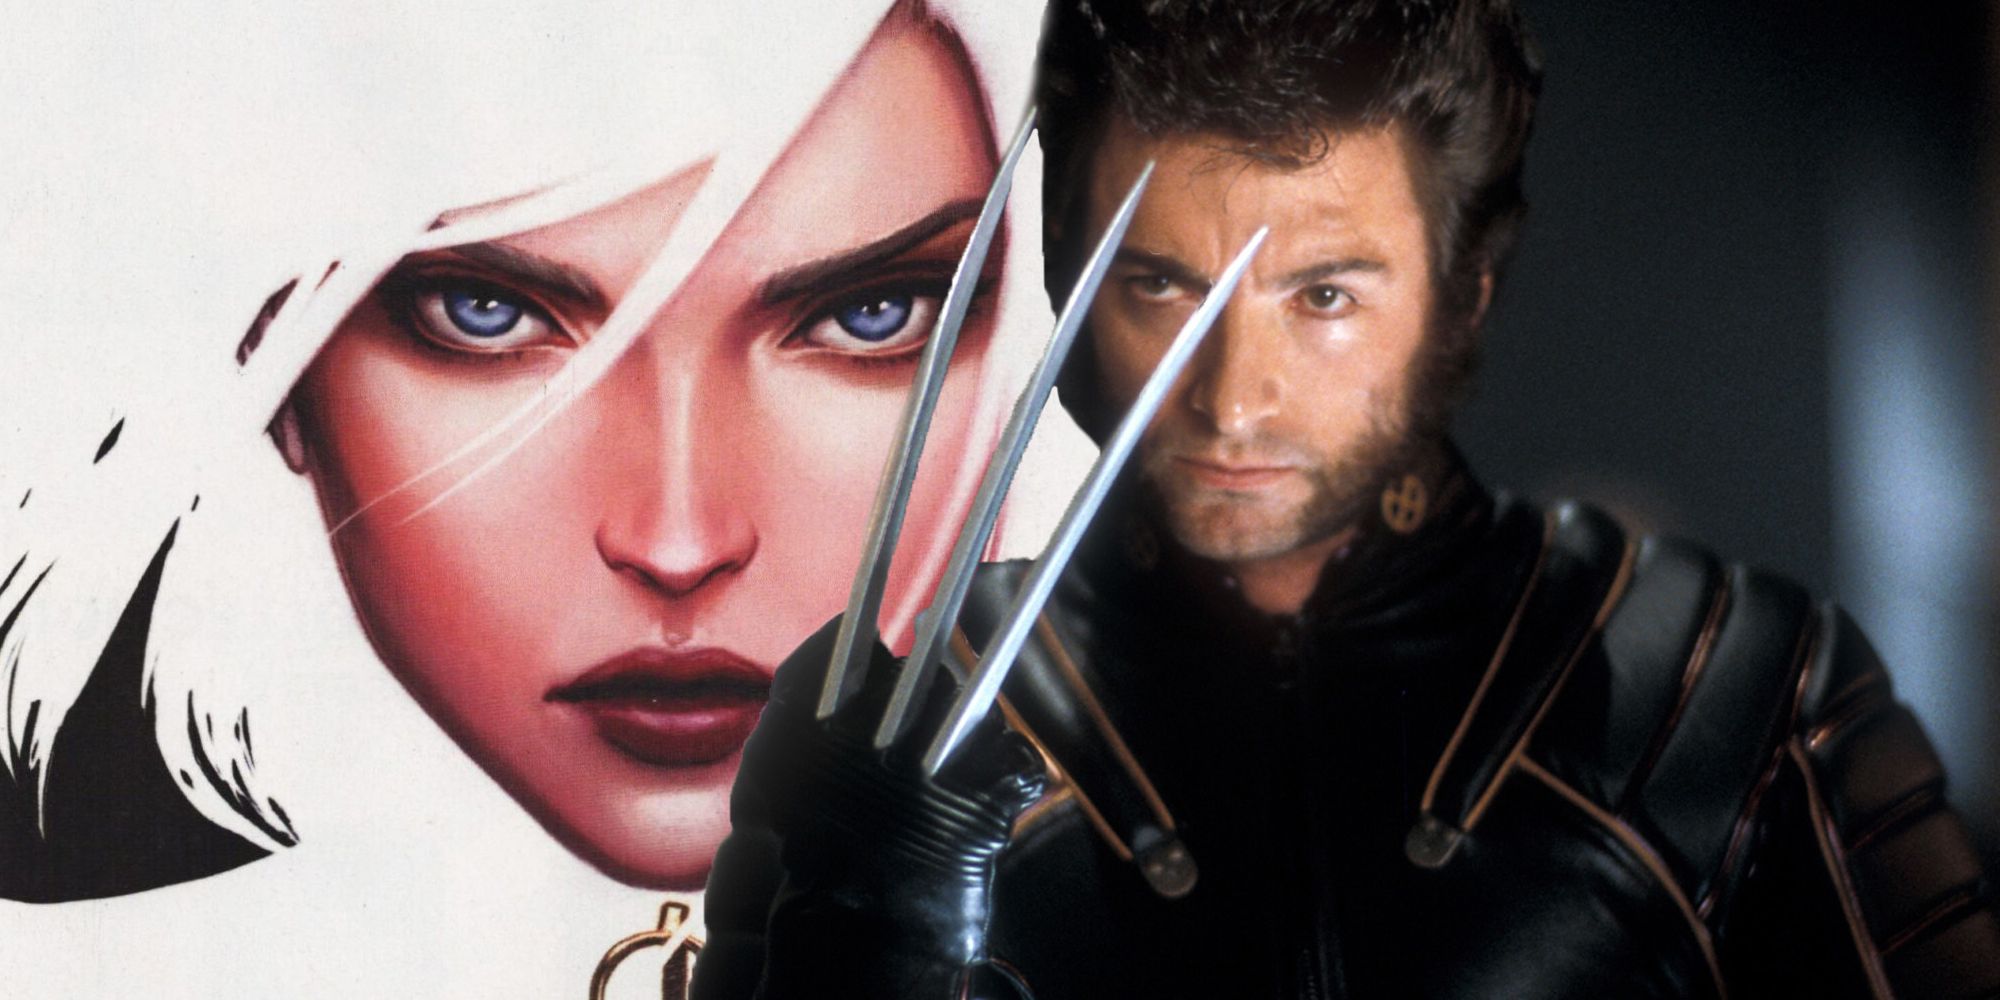 X-Men MCU Wolverine as played by Hugh Jackman in front of White Widow Yelena Belova from the comics